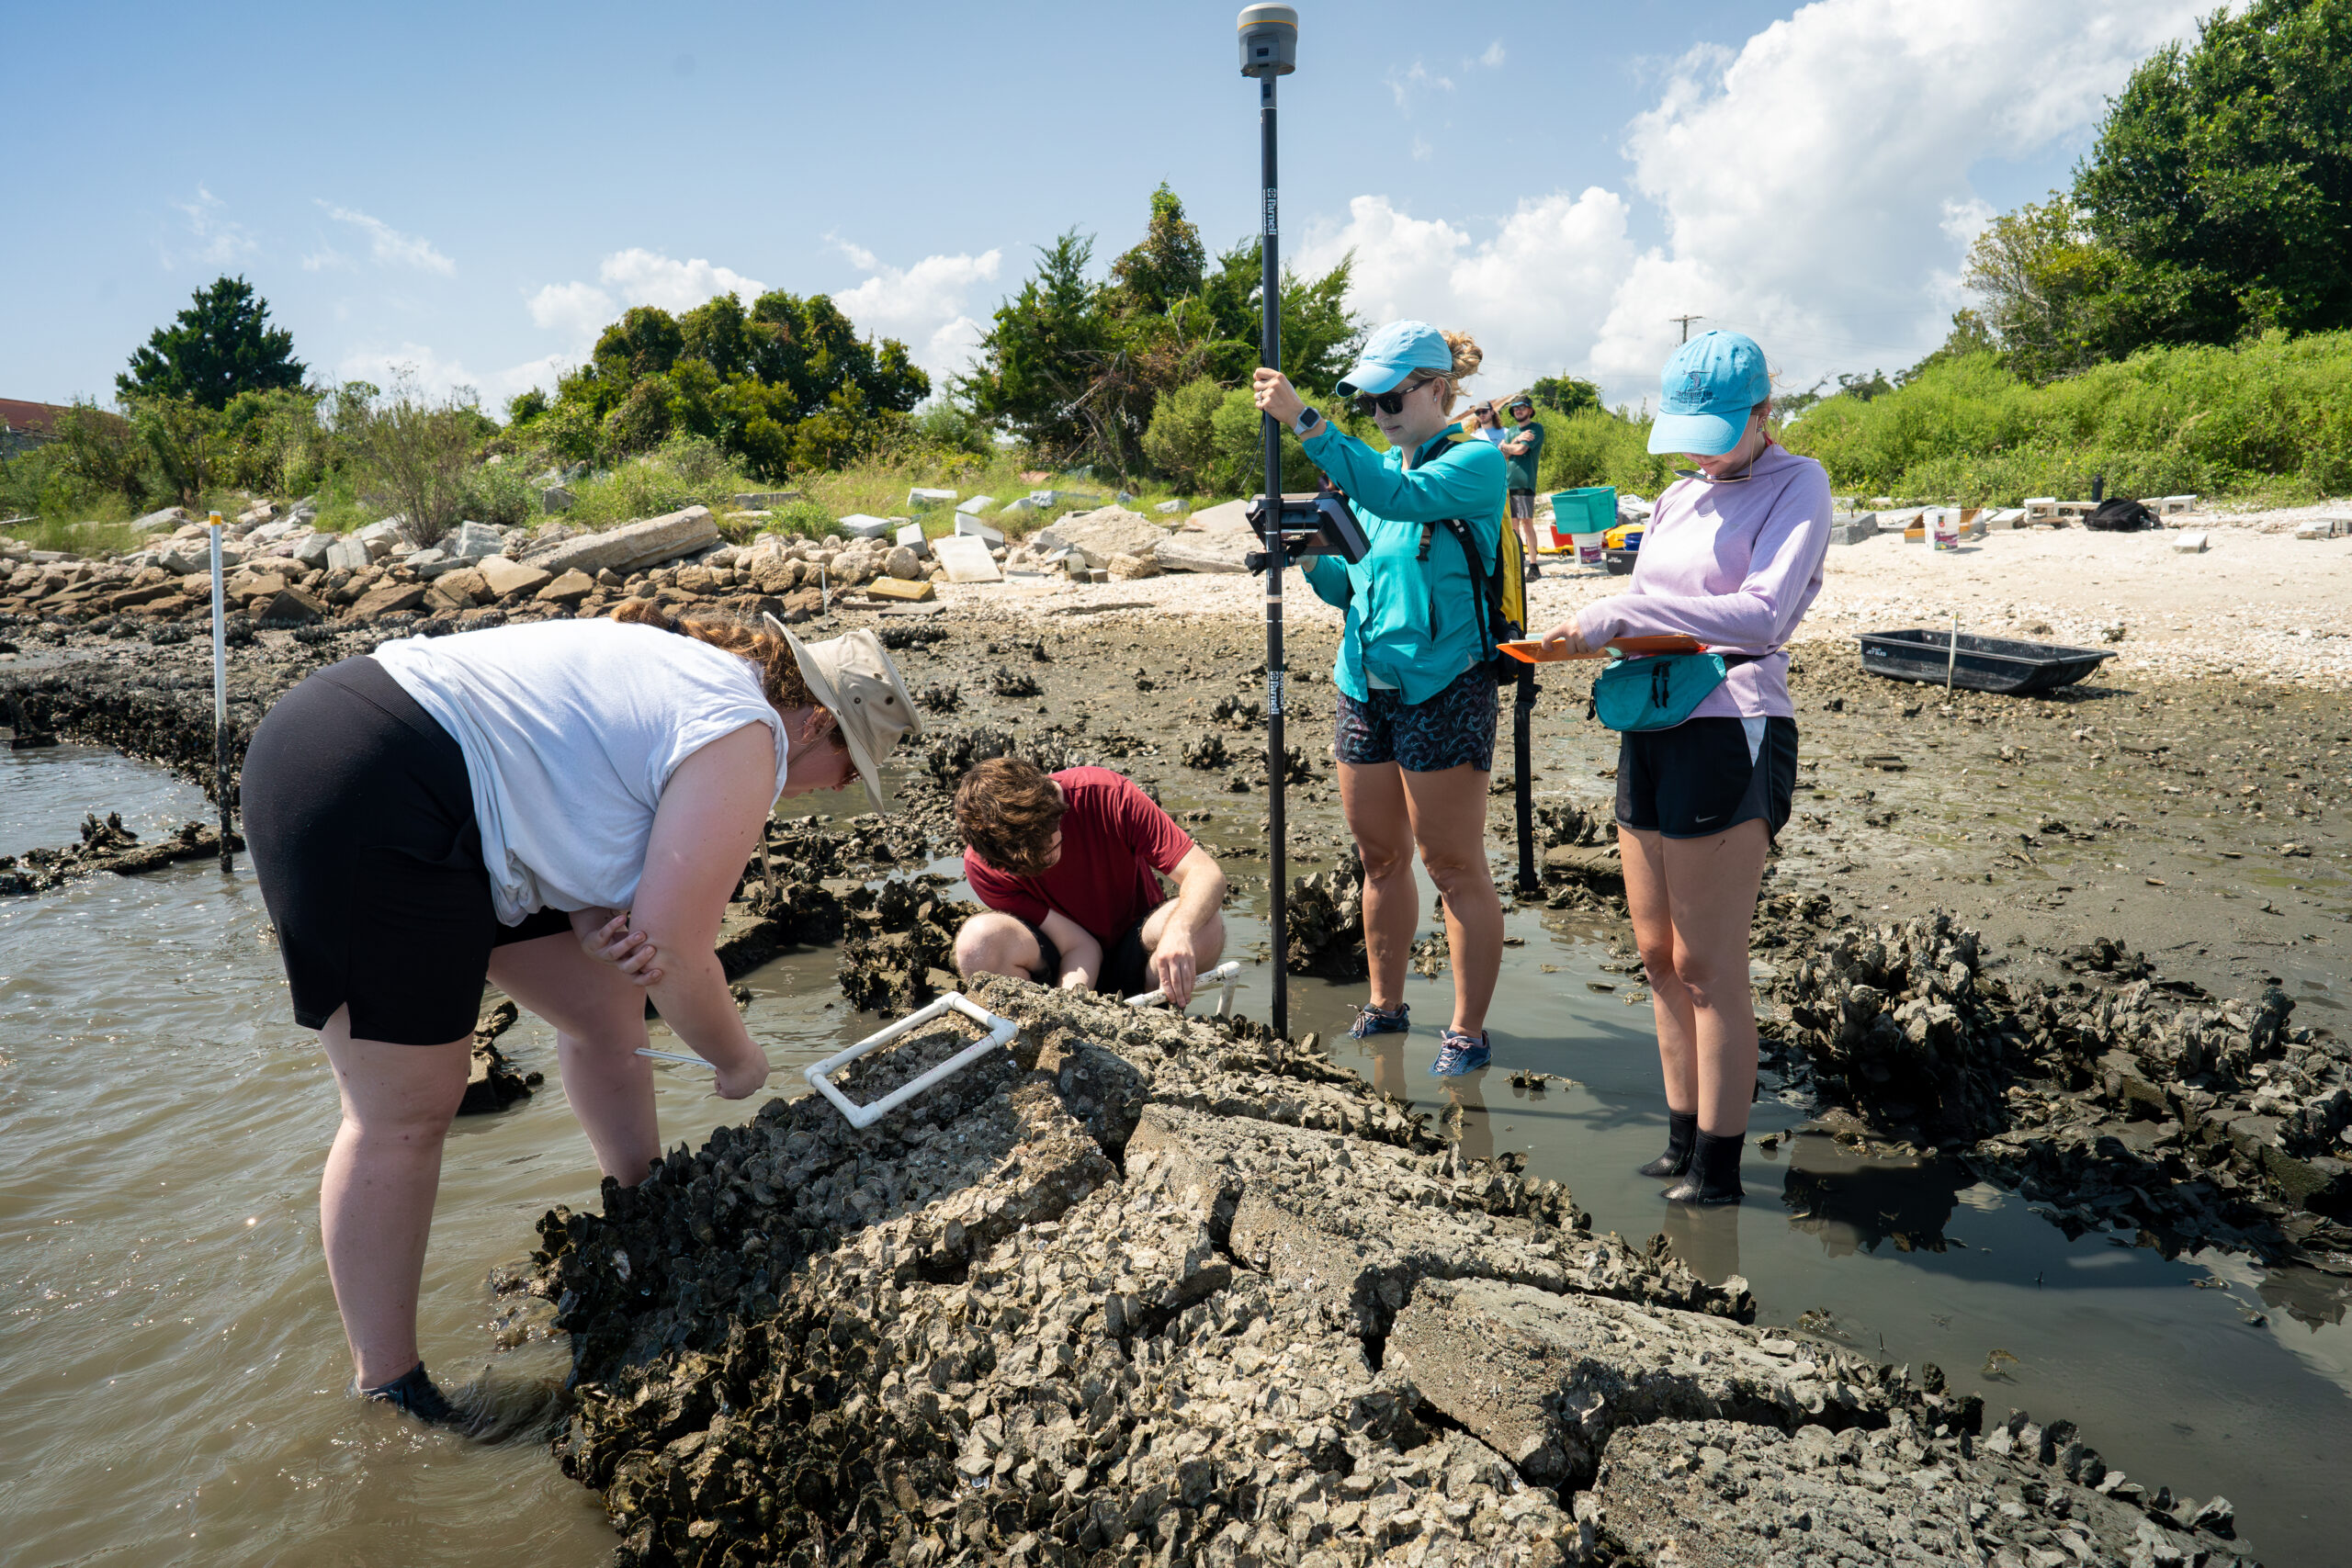 Rachel Gittman and a group of students standing in shallow water measuring oyster growth on an artificial structure near shore